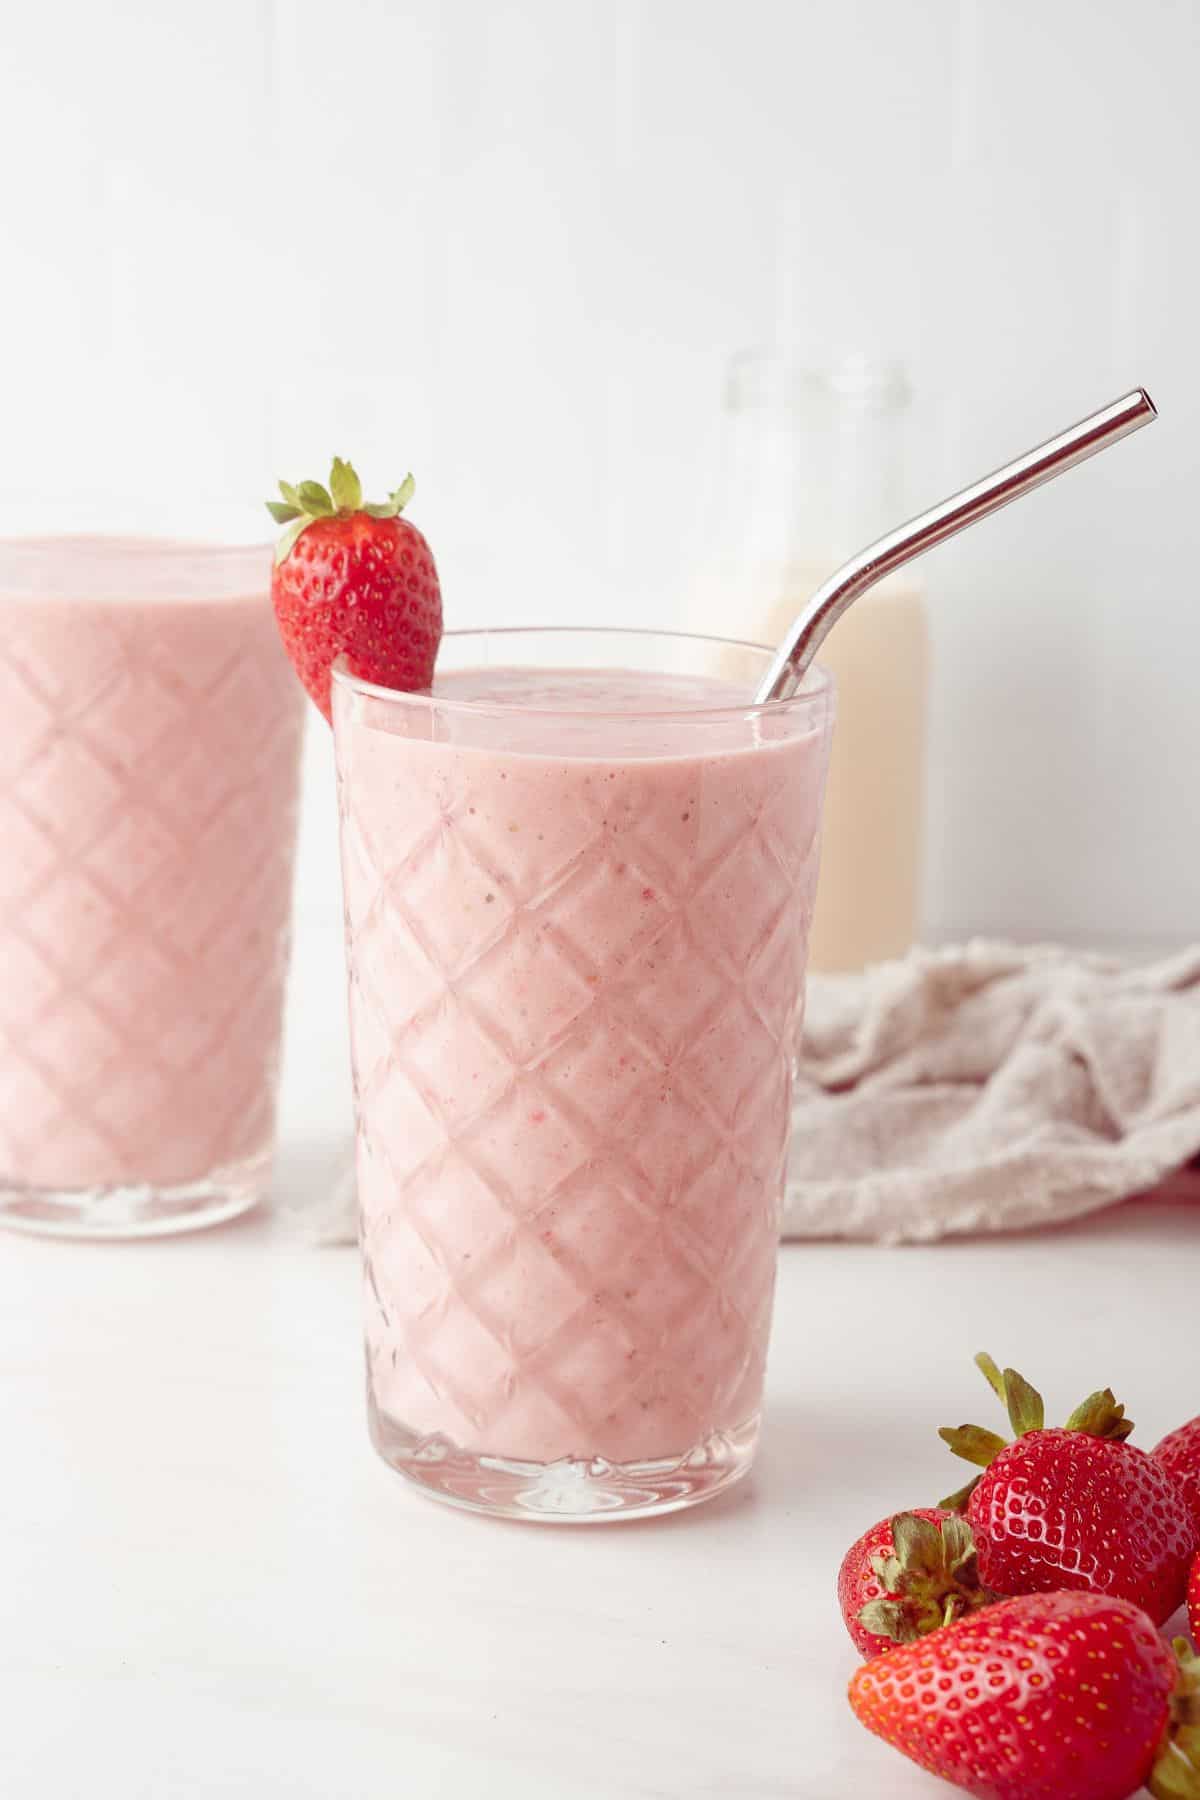 Two glasses full of Strawberry and Banana Smoothie, one with a straw, with some strawberries around the edge.